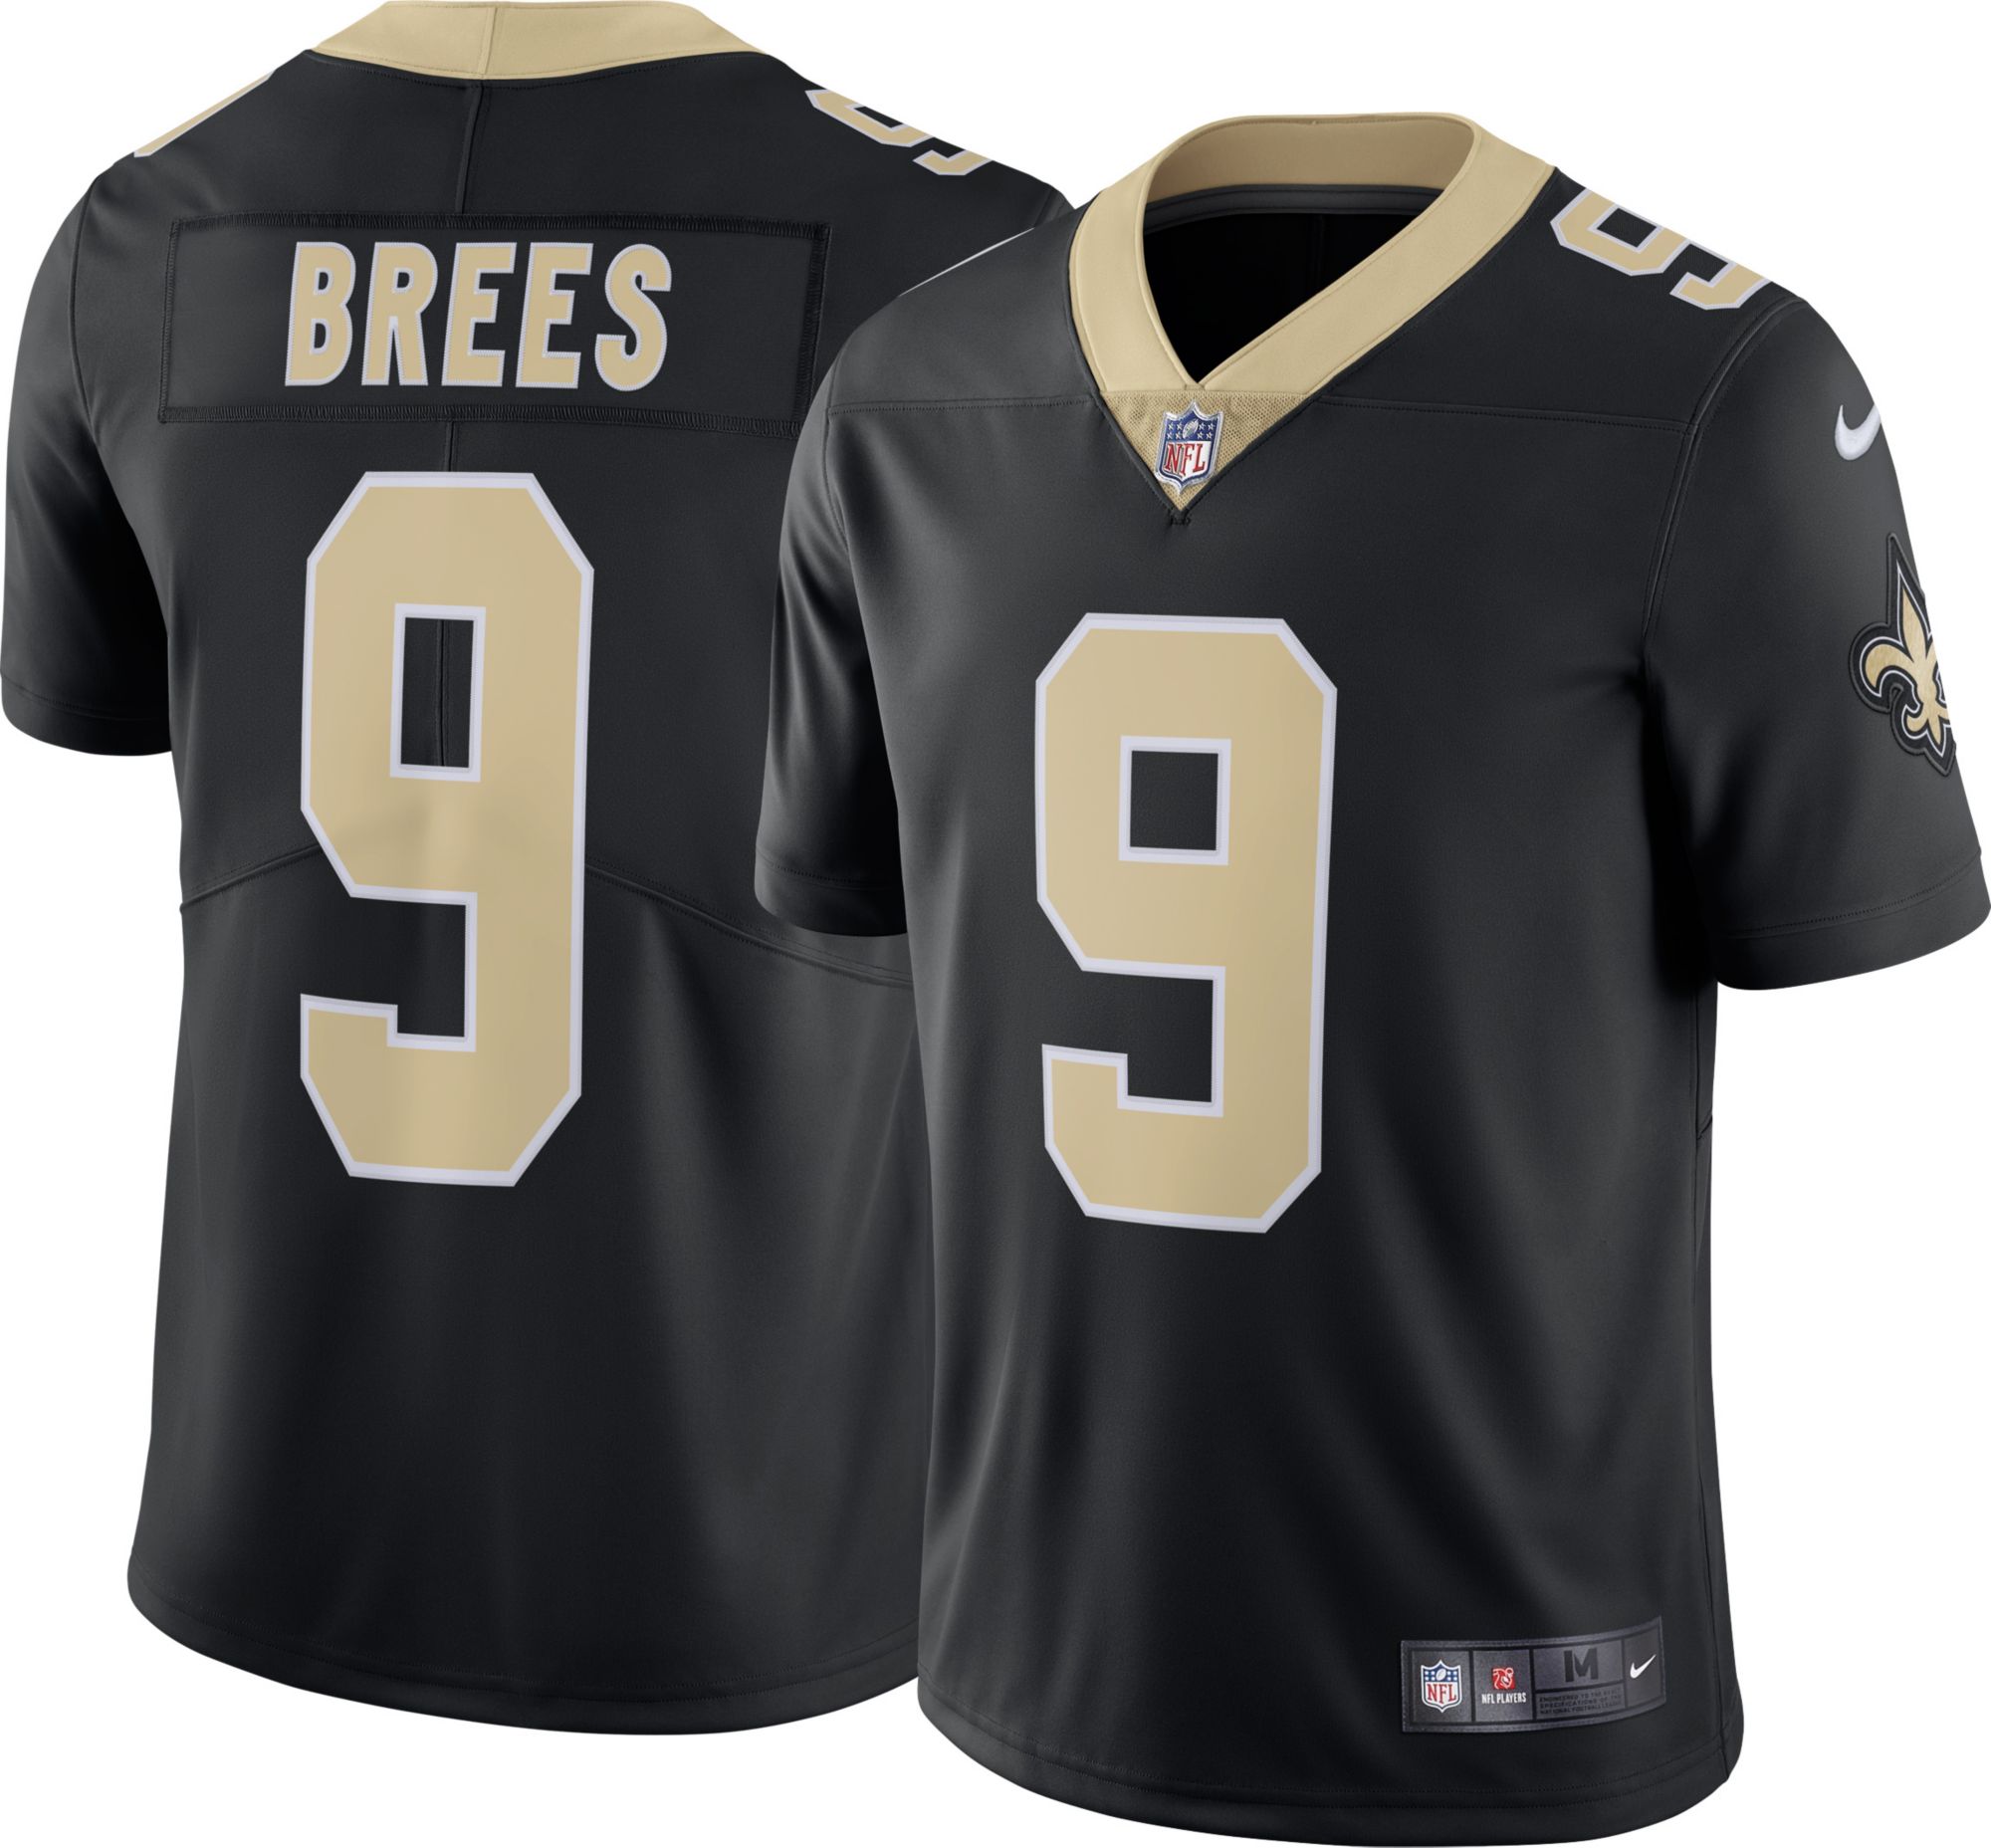 what is drew brees jersey number